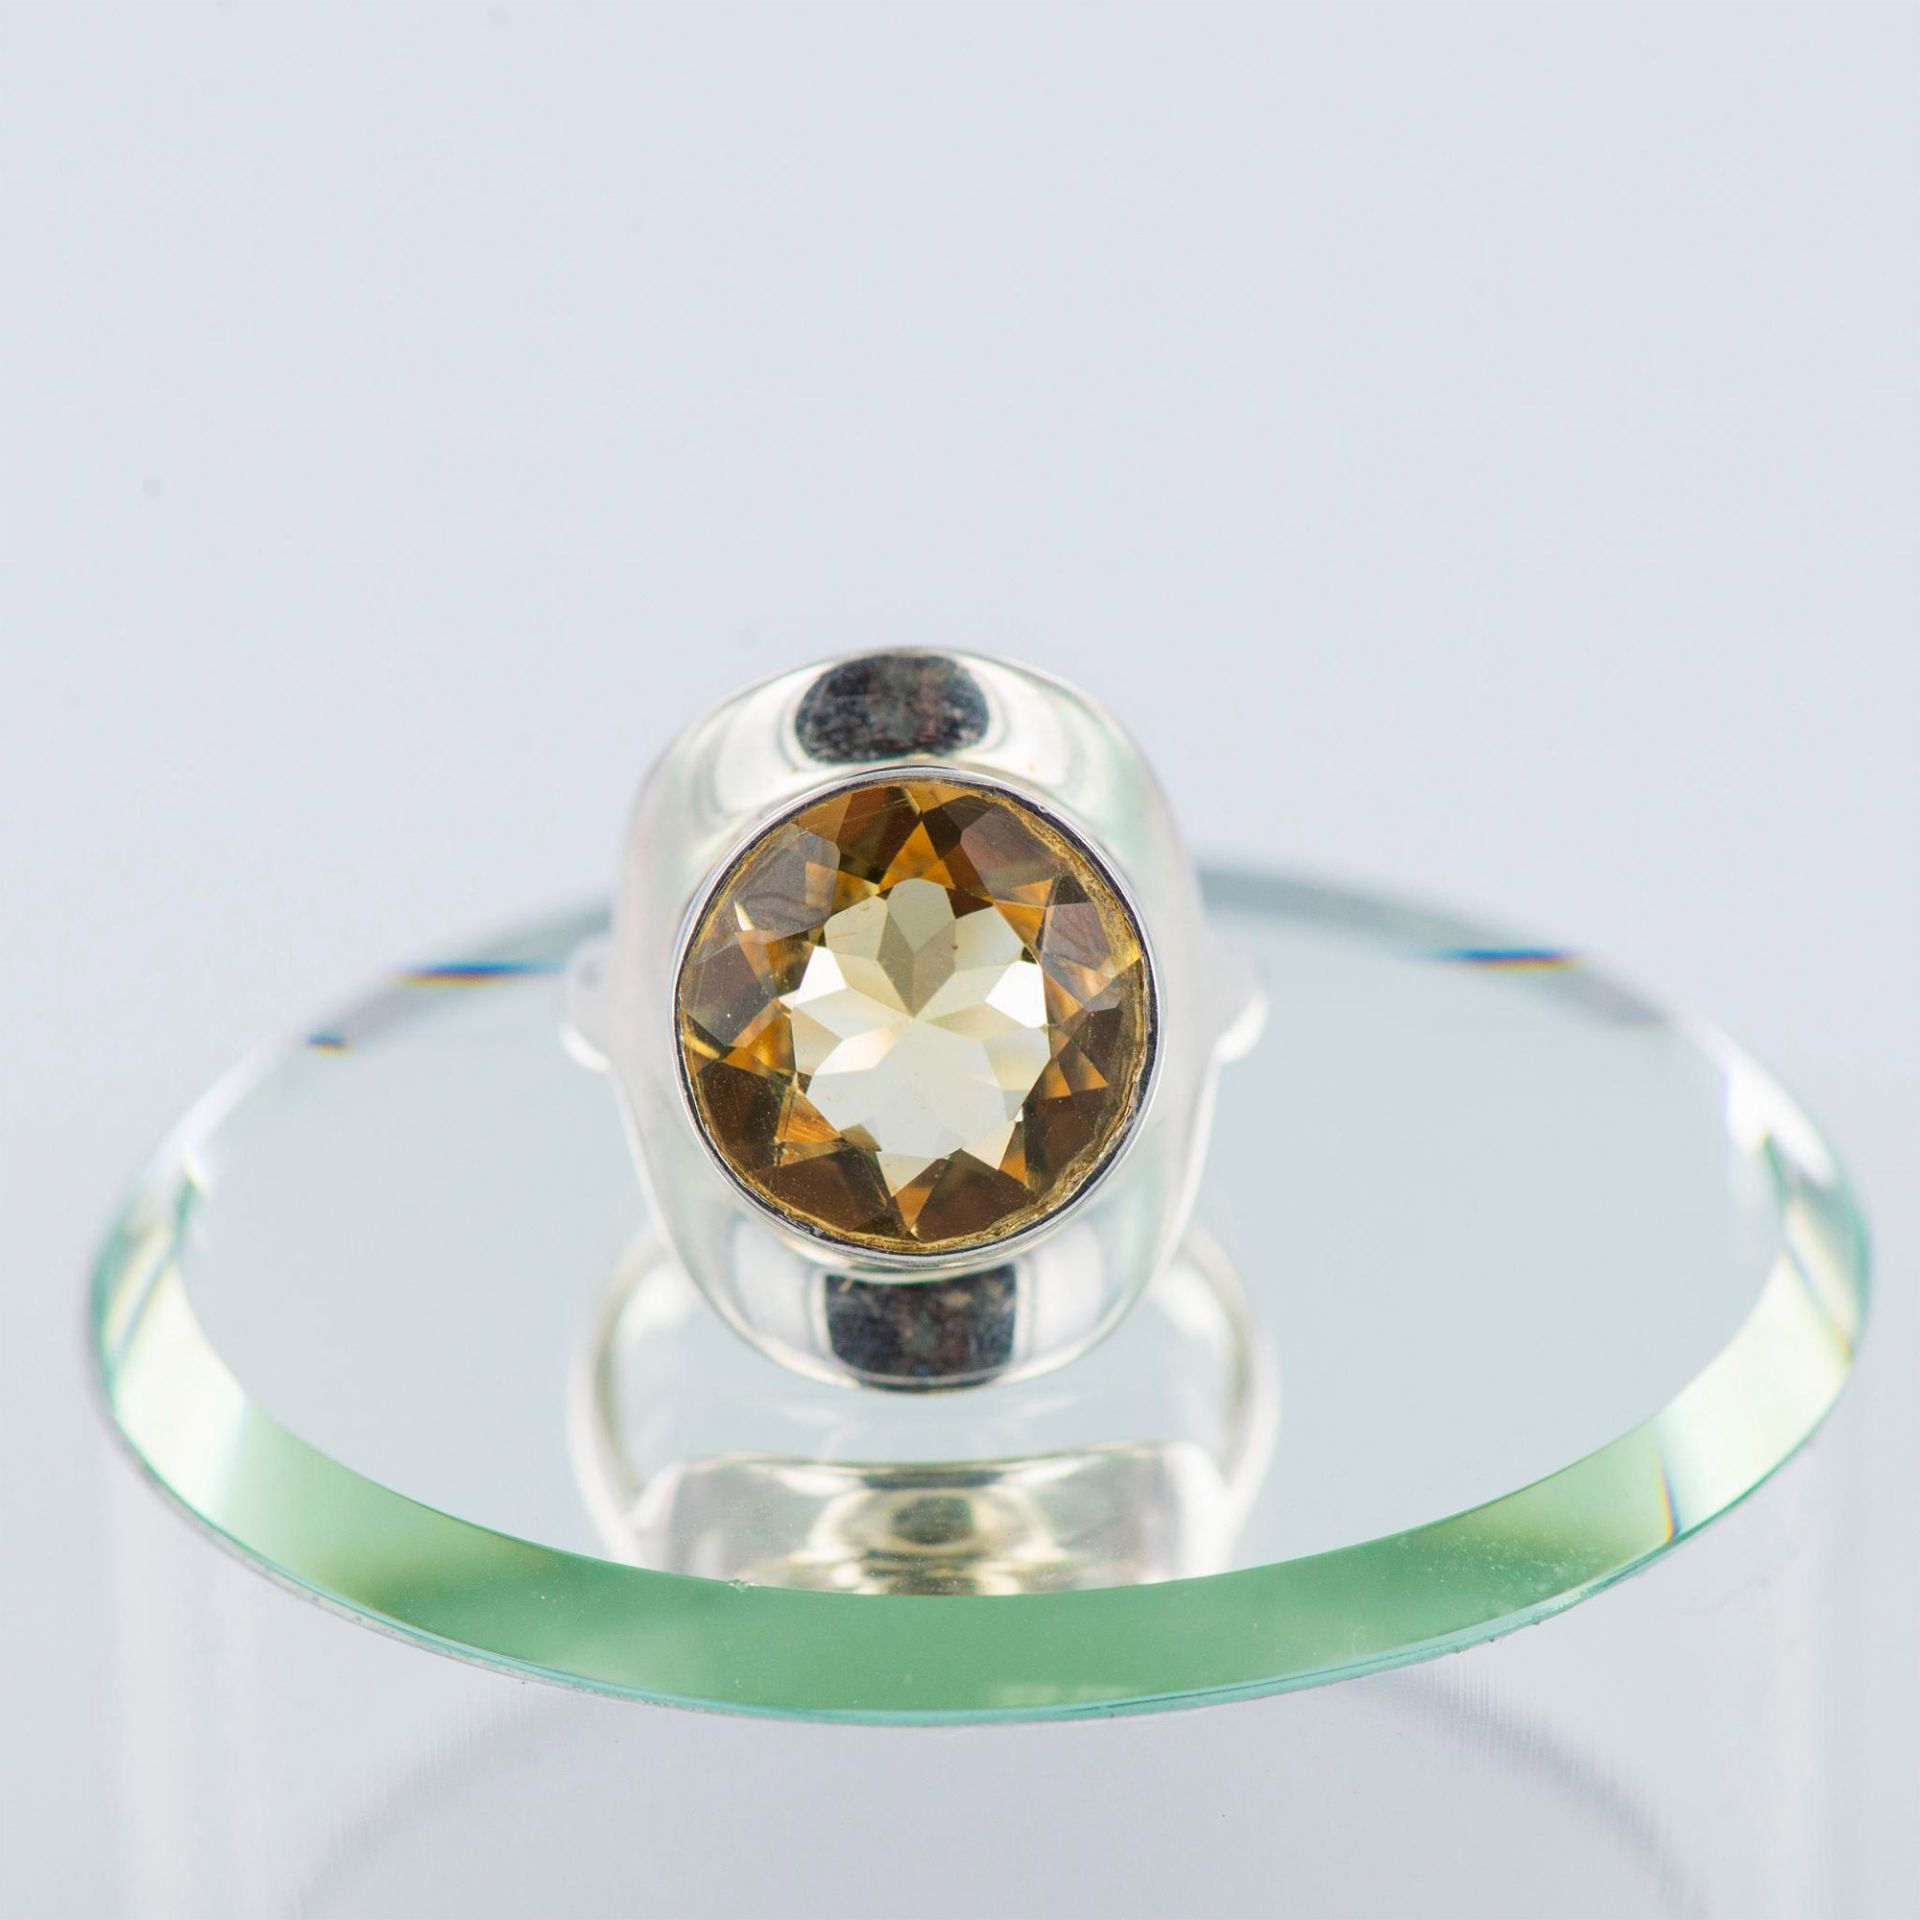 Tous Sterling Silver and Citrine Ring - Image 6 of 11